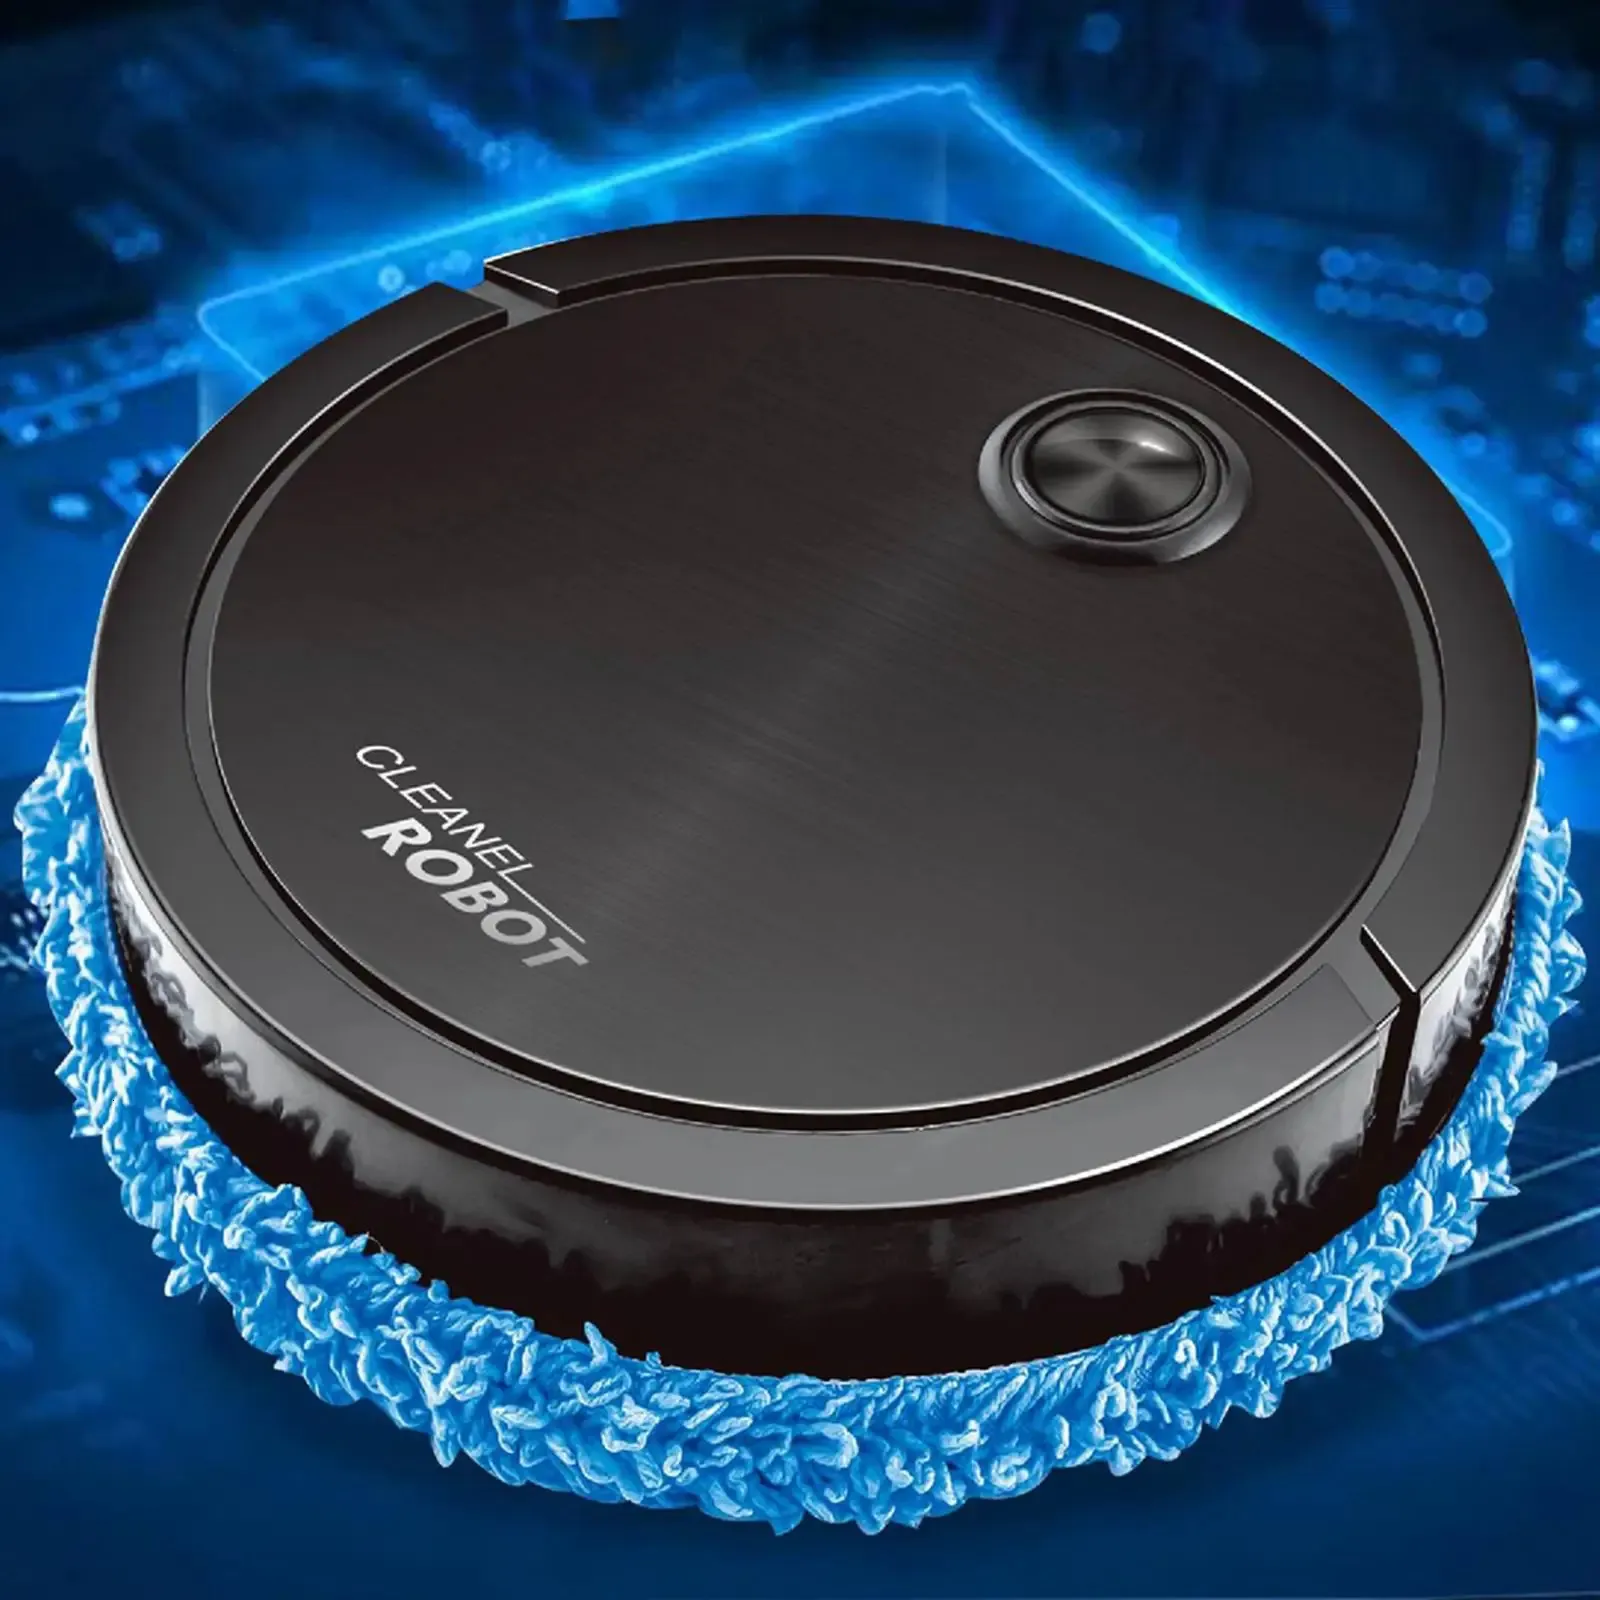 Intelligent Mopping Robot Cleaner Cordless Mop Slim Body Household Sweeper